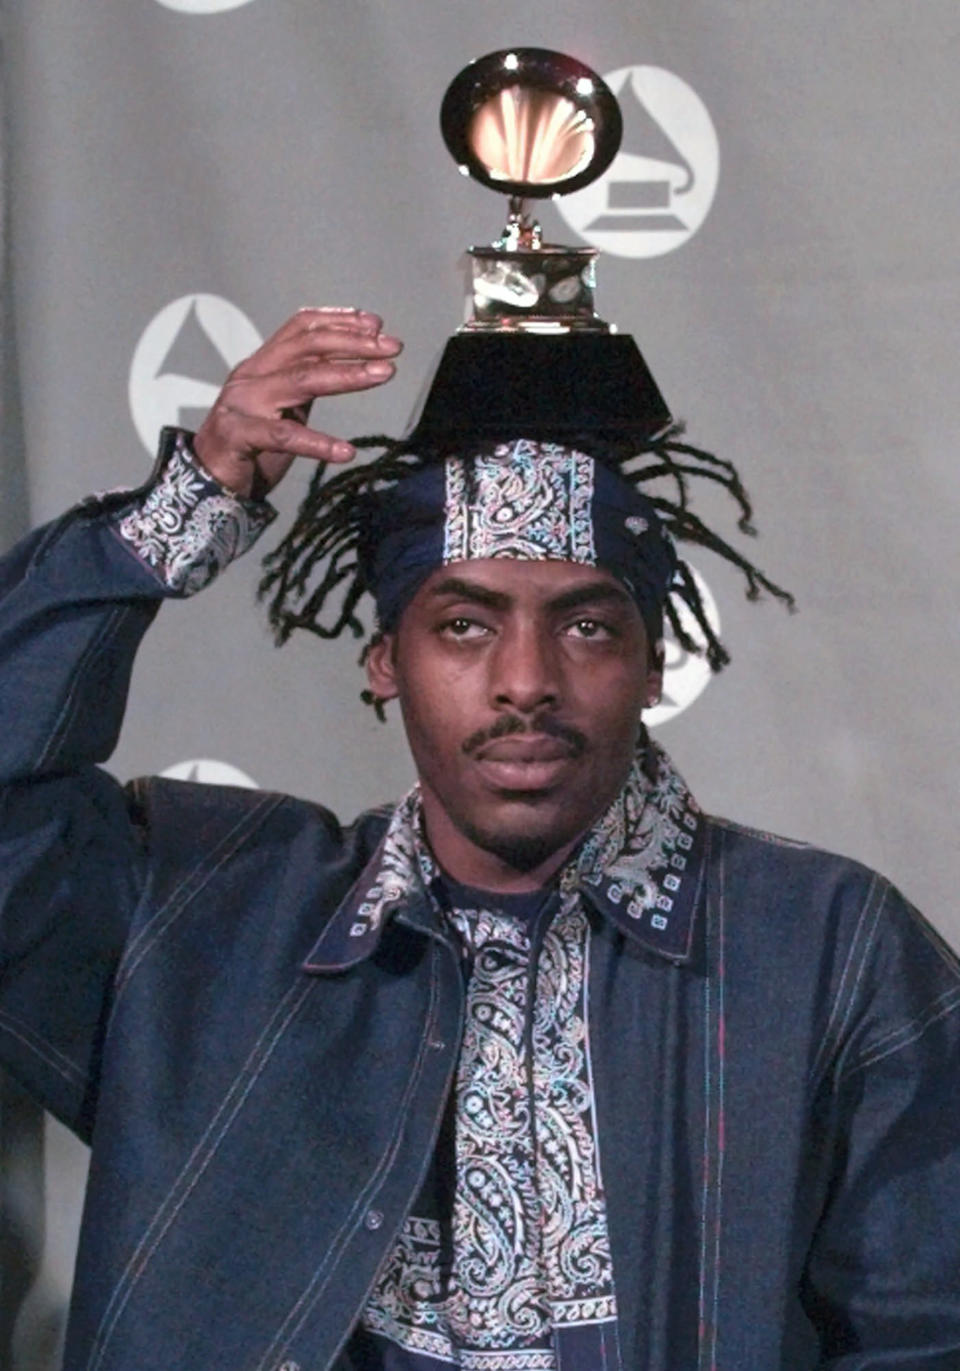 FILE - Coolio balances the Grammy he won for Best Rap Solo Performance at the 38th annual Grammy Awards at the Shrine Auditorium in Los Angeles, Wednesday, Feb. 28, 1996. Coolio, the rapper who was among hip-hop’s biggest names of the 1990s with hits including “Gangsta’s Paradise” and “Fantastic Voyage,” has died. Manager Jarez Posey tells The Associated Press that Coolio, whose legal name was Artis Leon Ivey Jr., died at the Los Angeles home of a friend on Wednesday, Sept. 28, 2022. He was 59. (AP Photo/Reed Saxon, File)